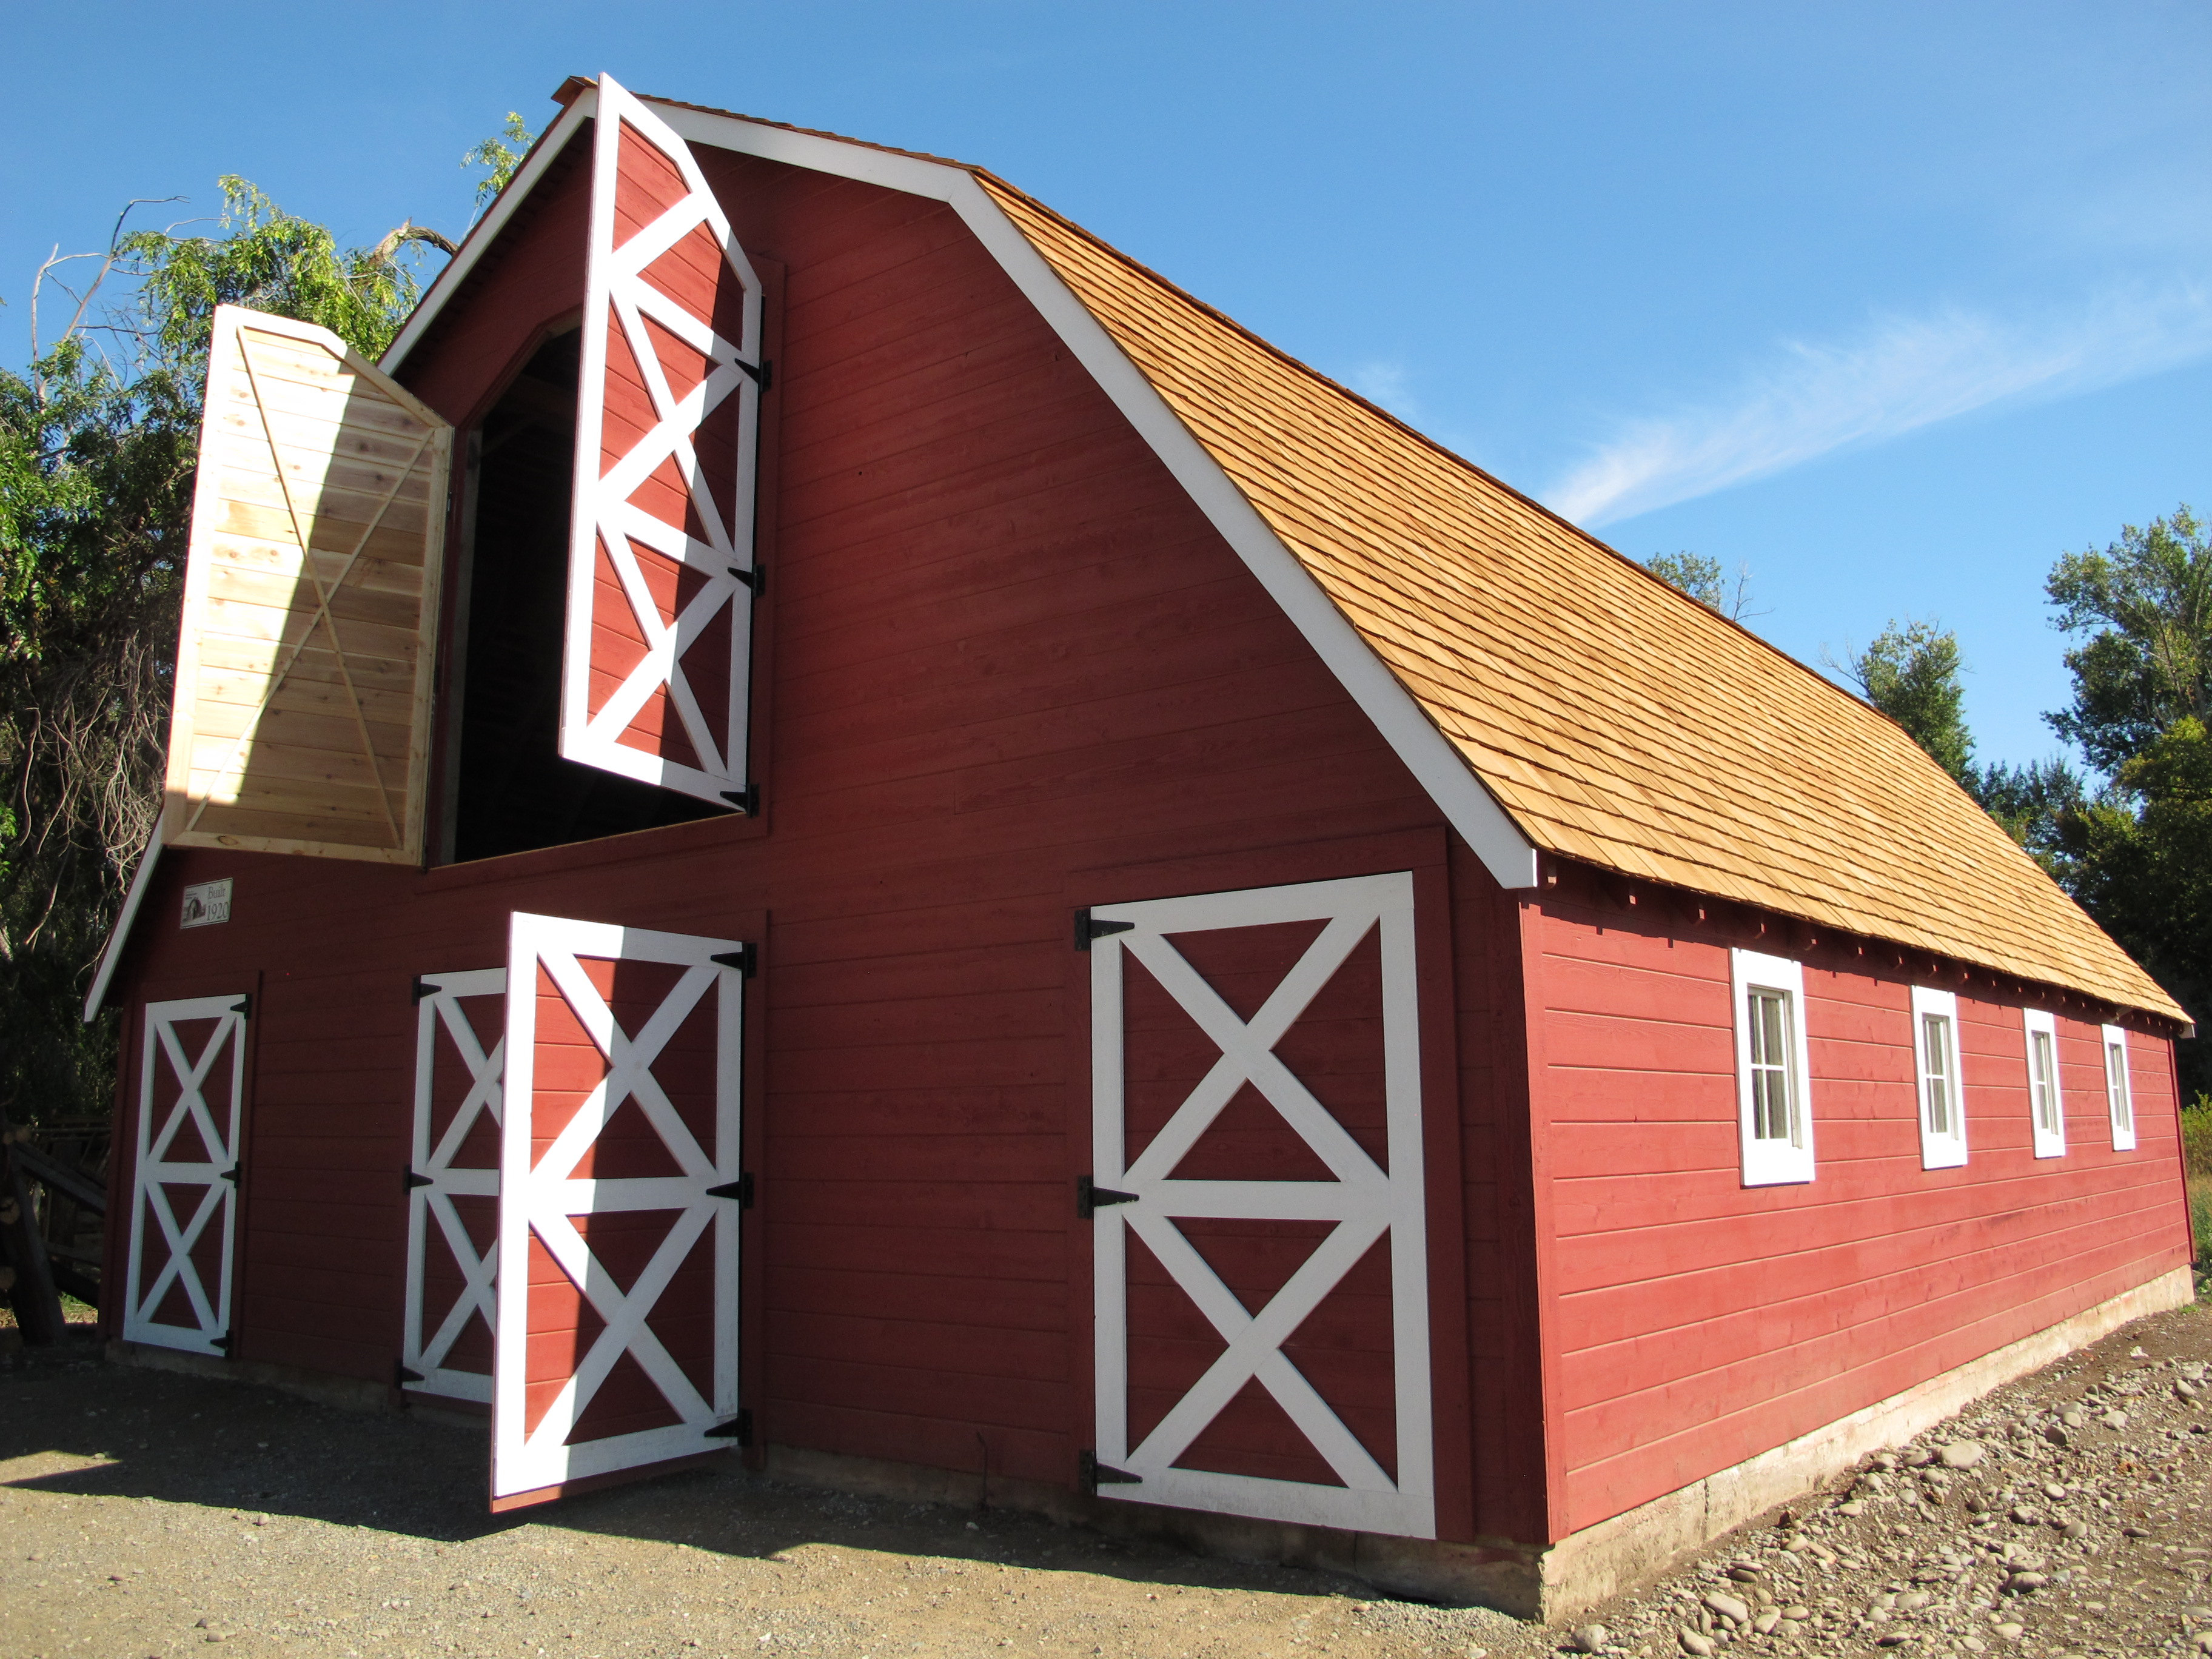 The Parrish family's historic barn in Toppenish is ready for use after a rehabilitation project made possible through a state matching-grant program. The Associated Press